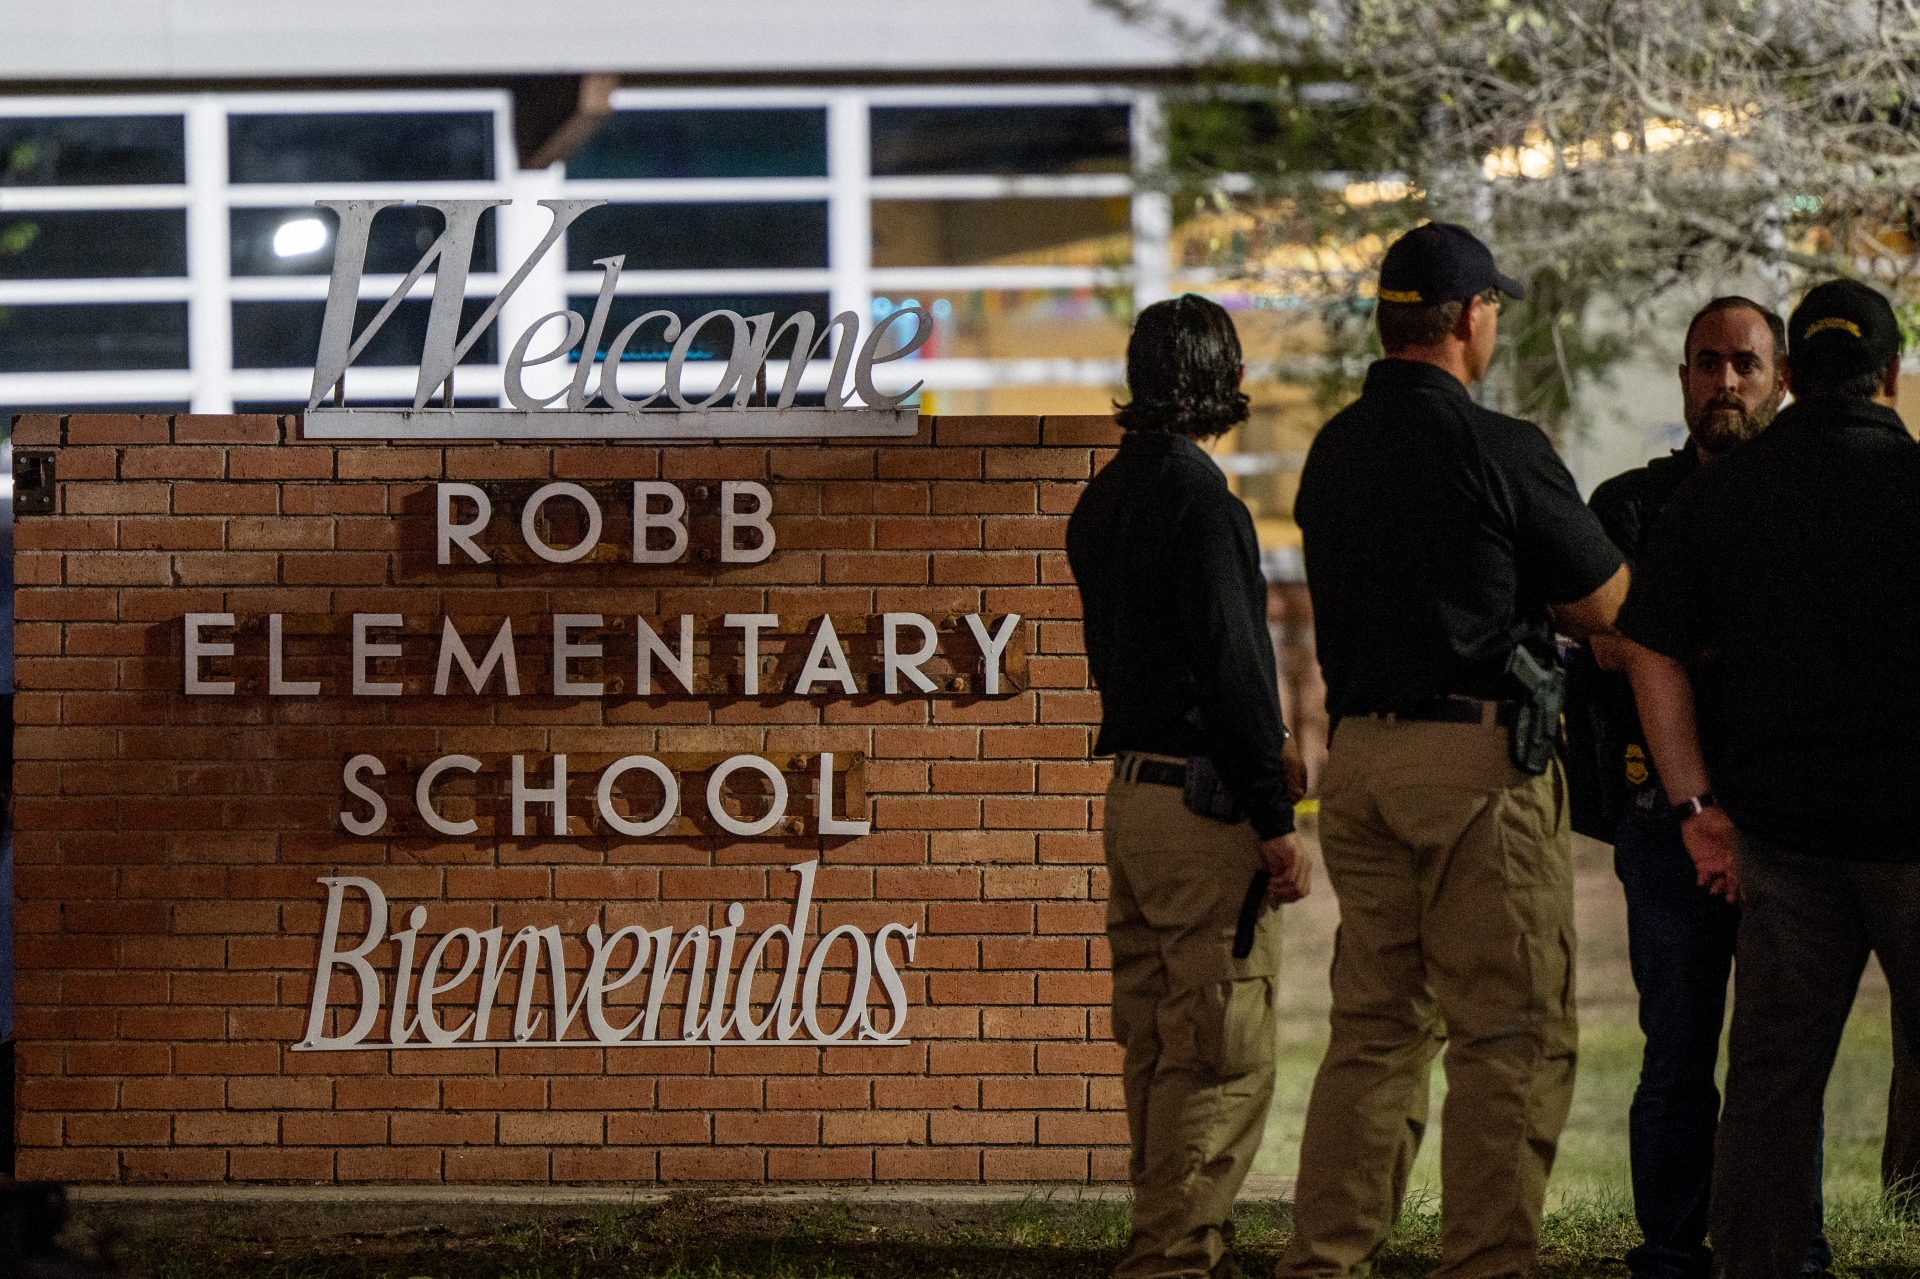 NRA Releases Statement On Texas Elementary School Shooting Saying It's "The Act Of A Lone, Deranged Criminal"